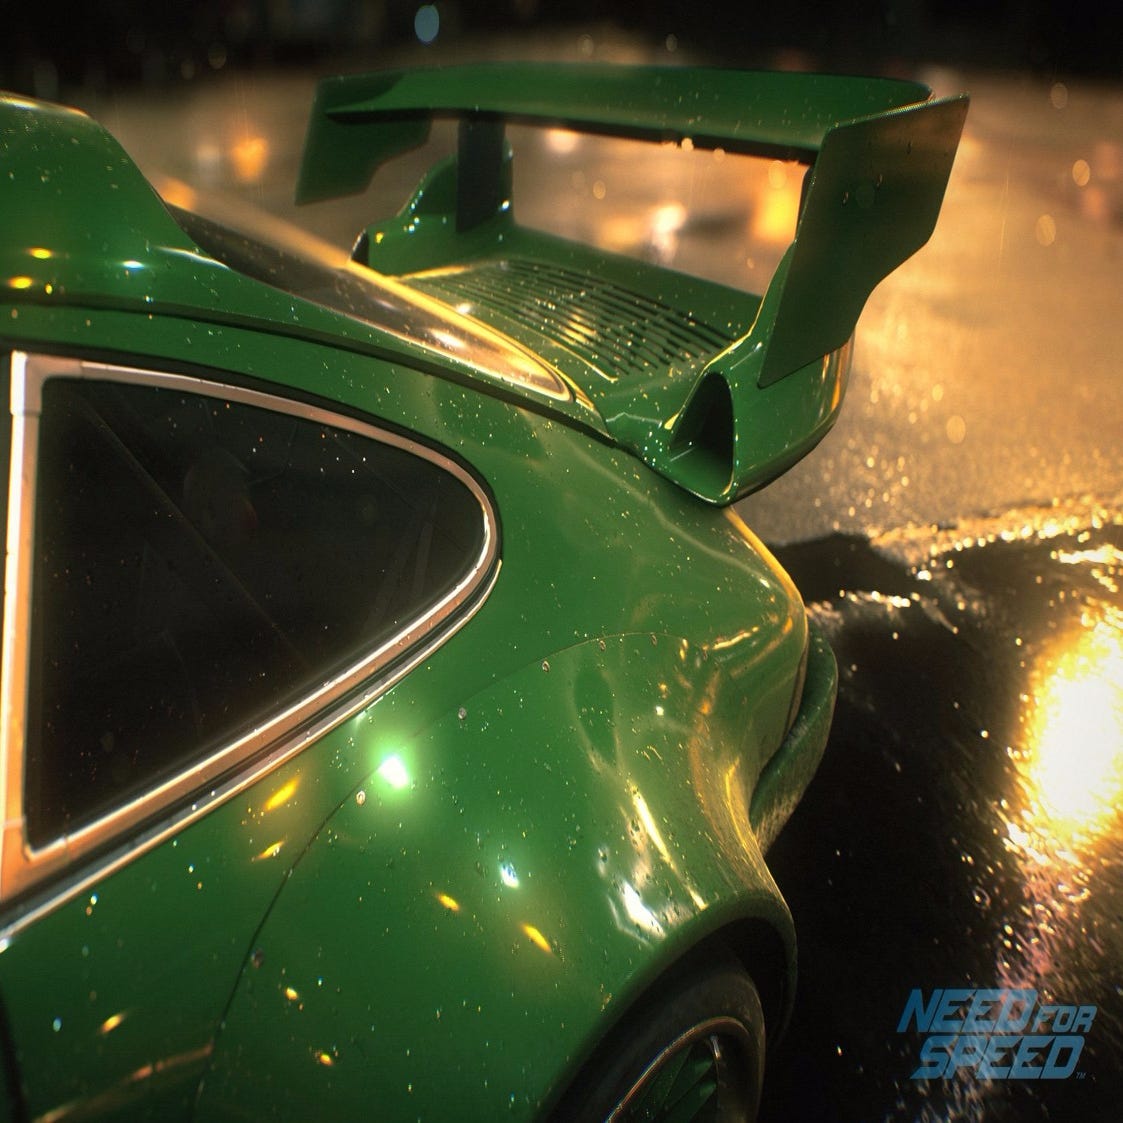 Need for Speed release date spotted